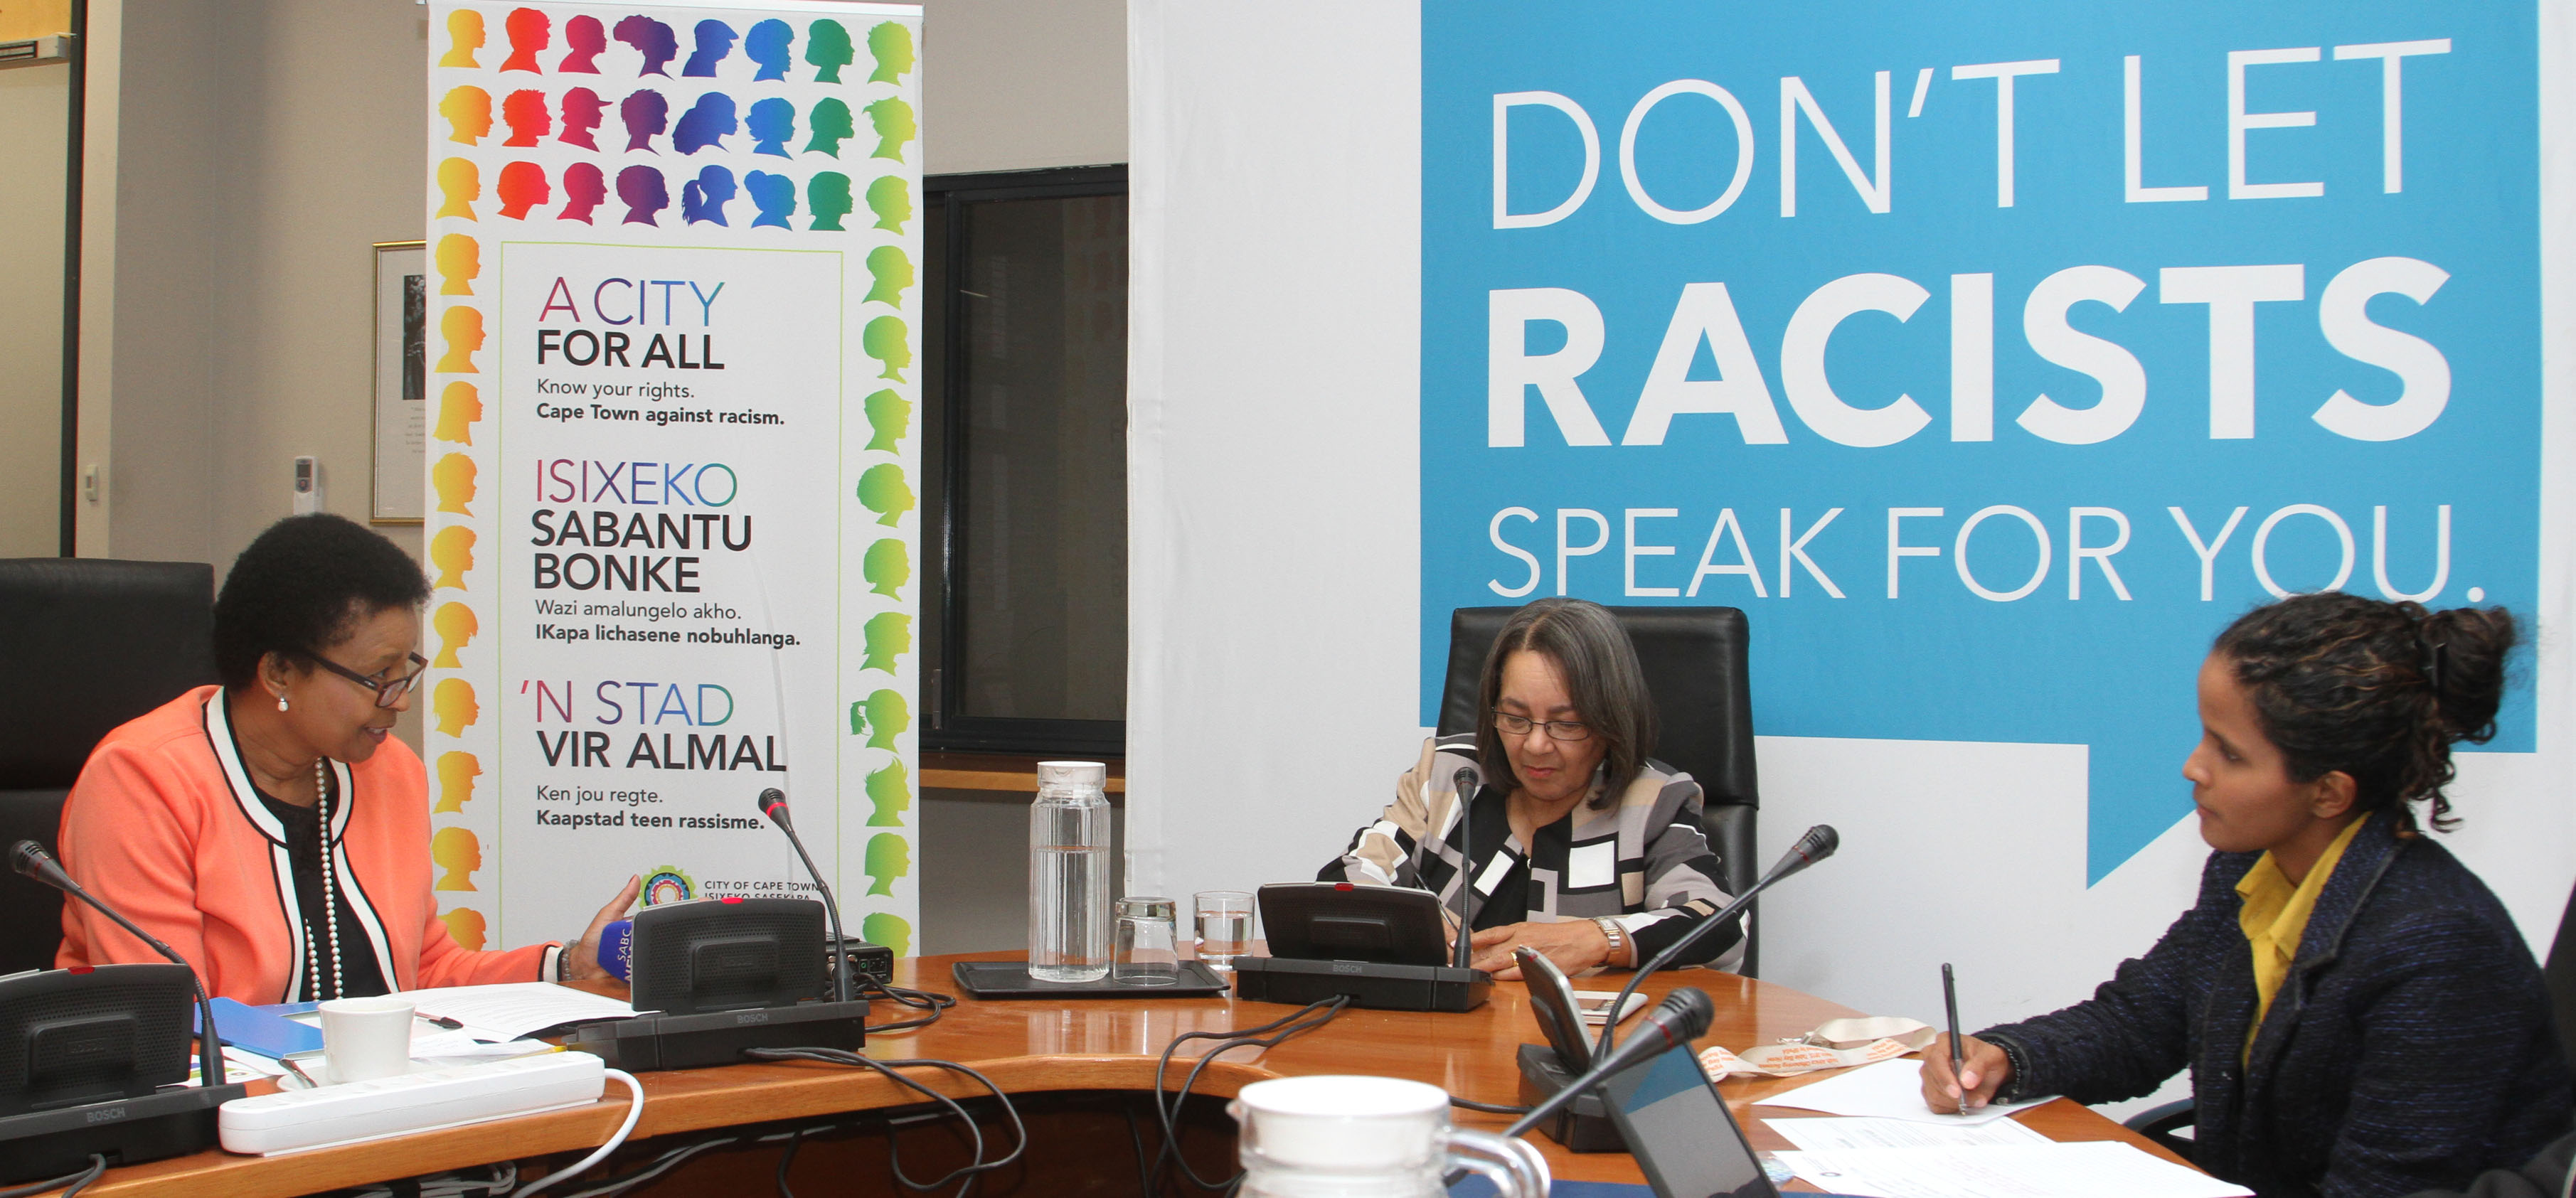 De Lille at an Inclusive City/anti-racism dialogue with the Dean of Student Affairs from the Cape Peninsula University of Technology